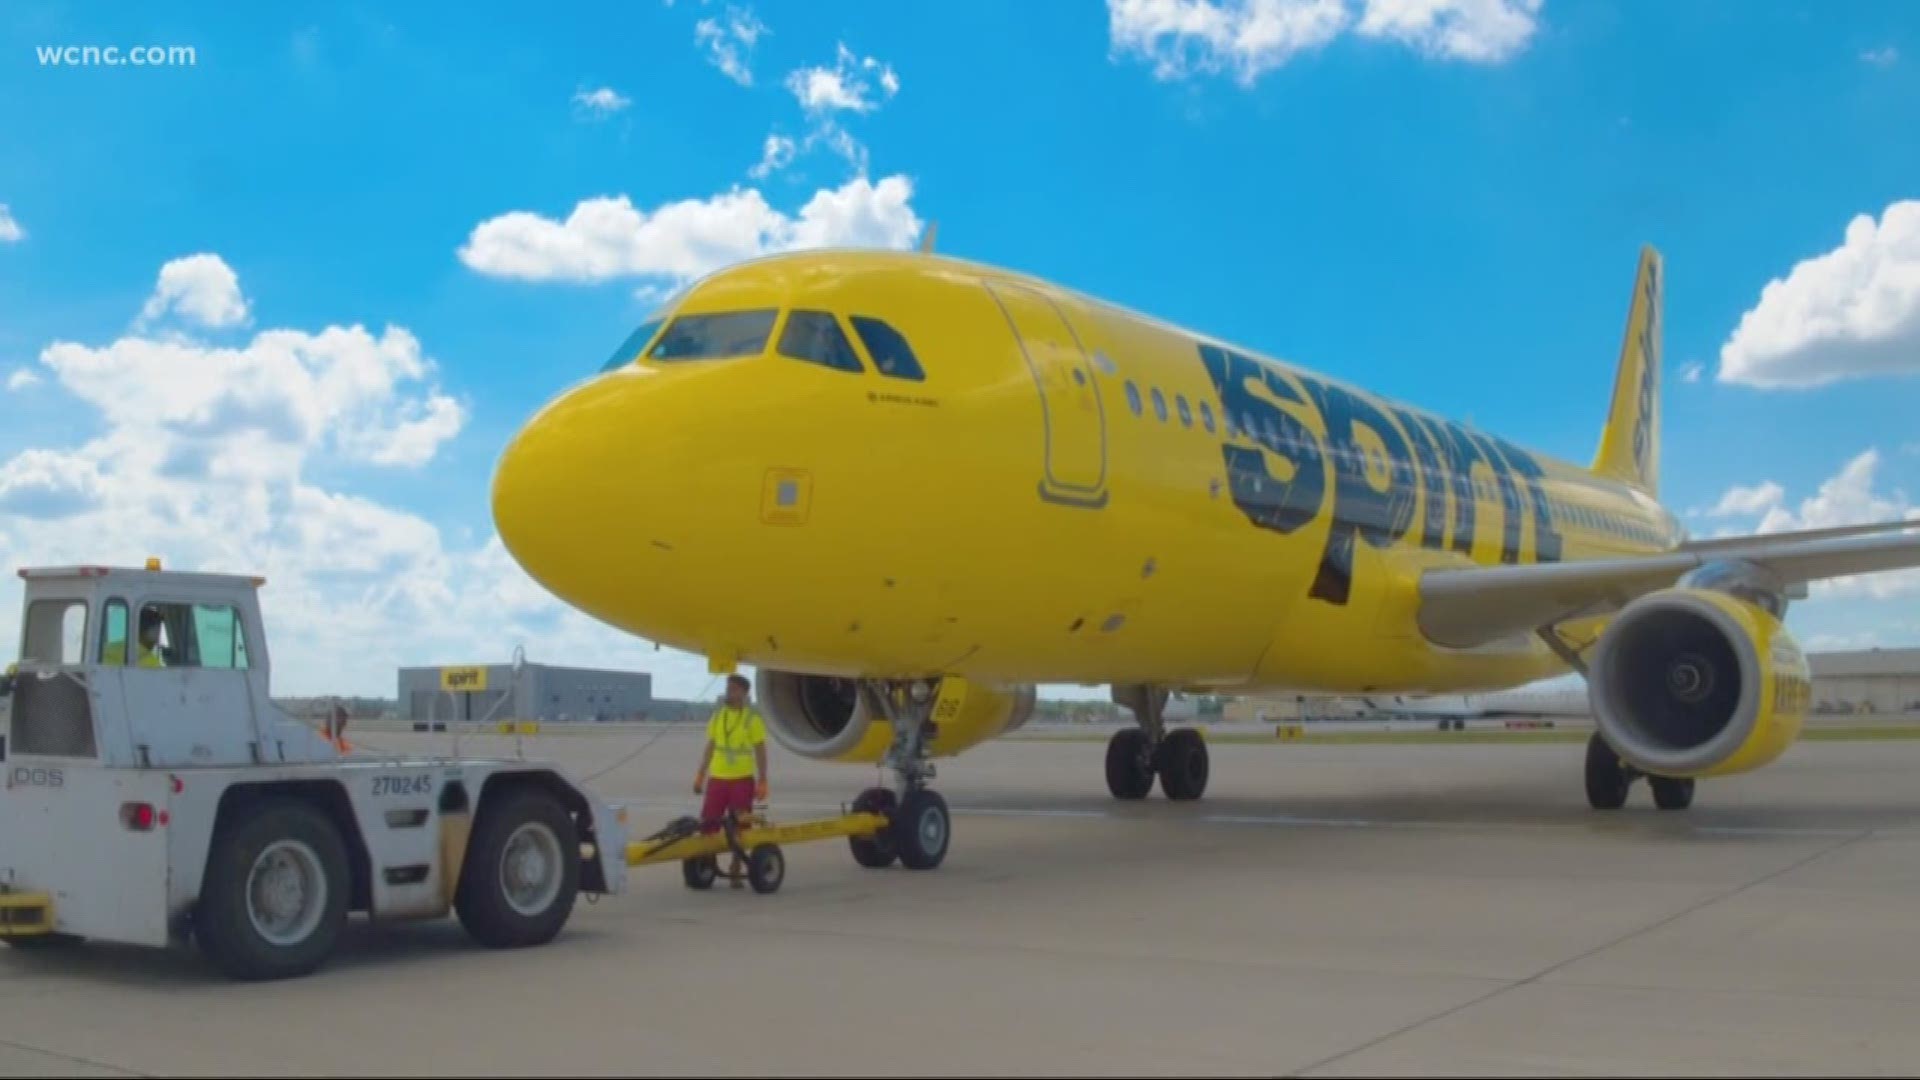 Spirit airlines officially launching nonstop service from Charlotte Douglas to four different destinations like Newark, Baltimore, Fort Lauderdale, and Orlando.